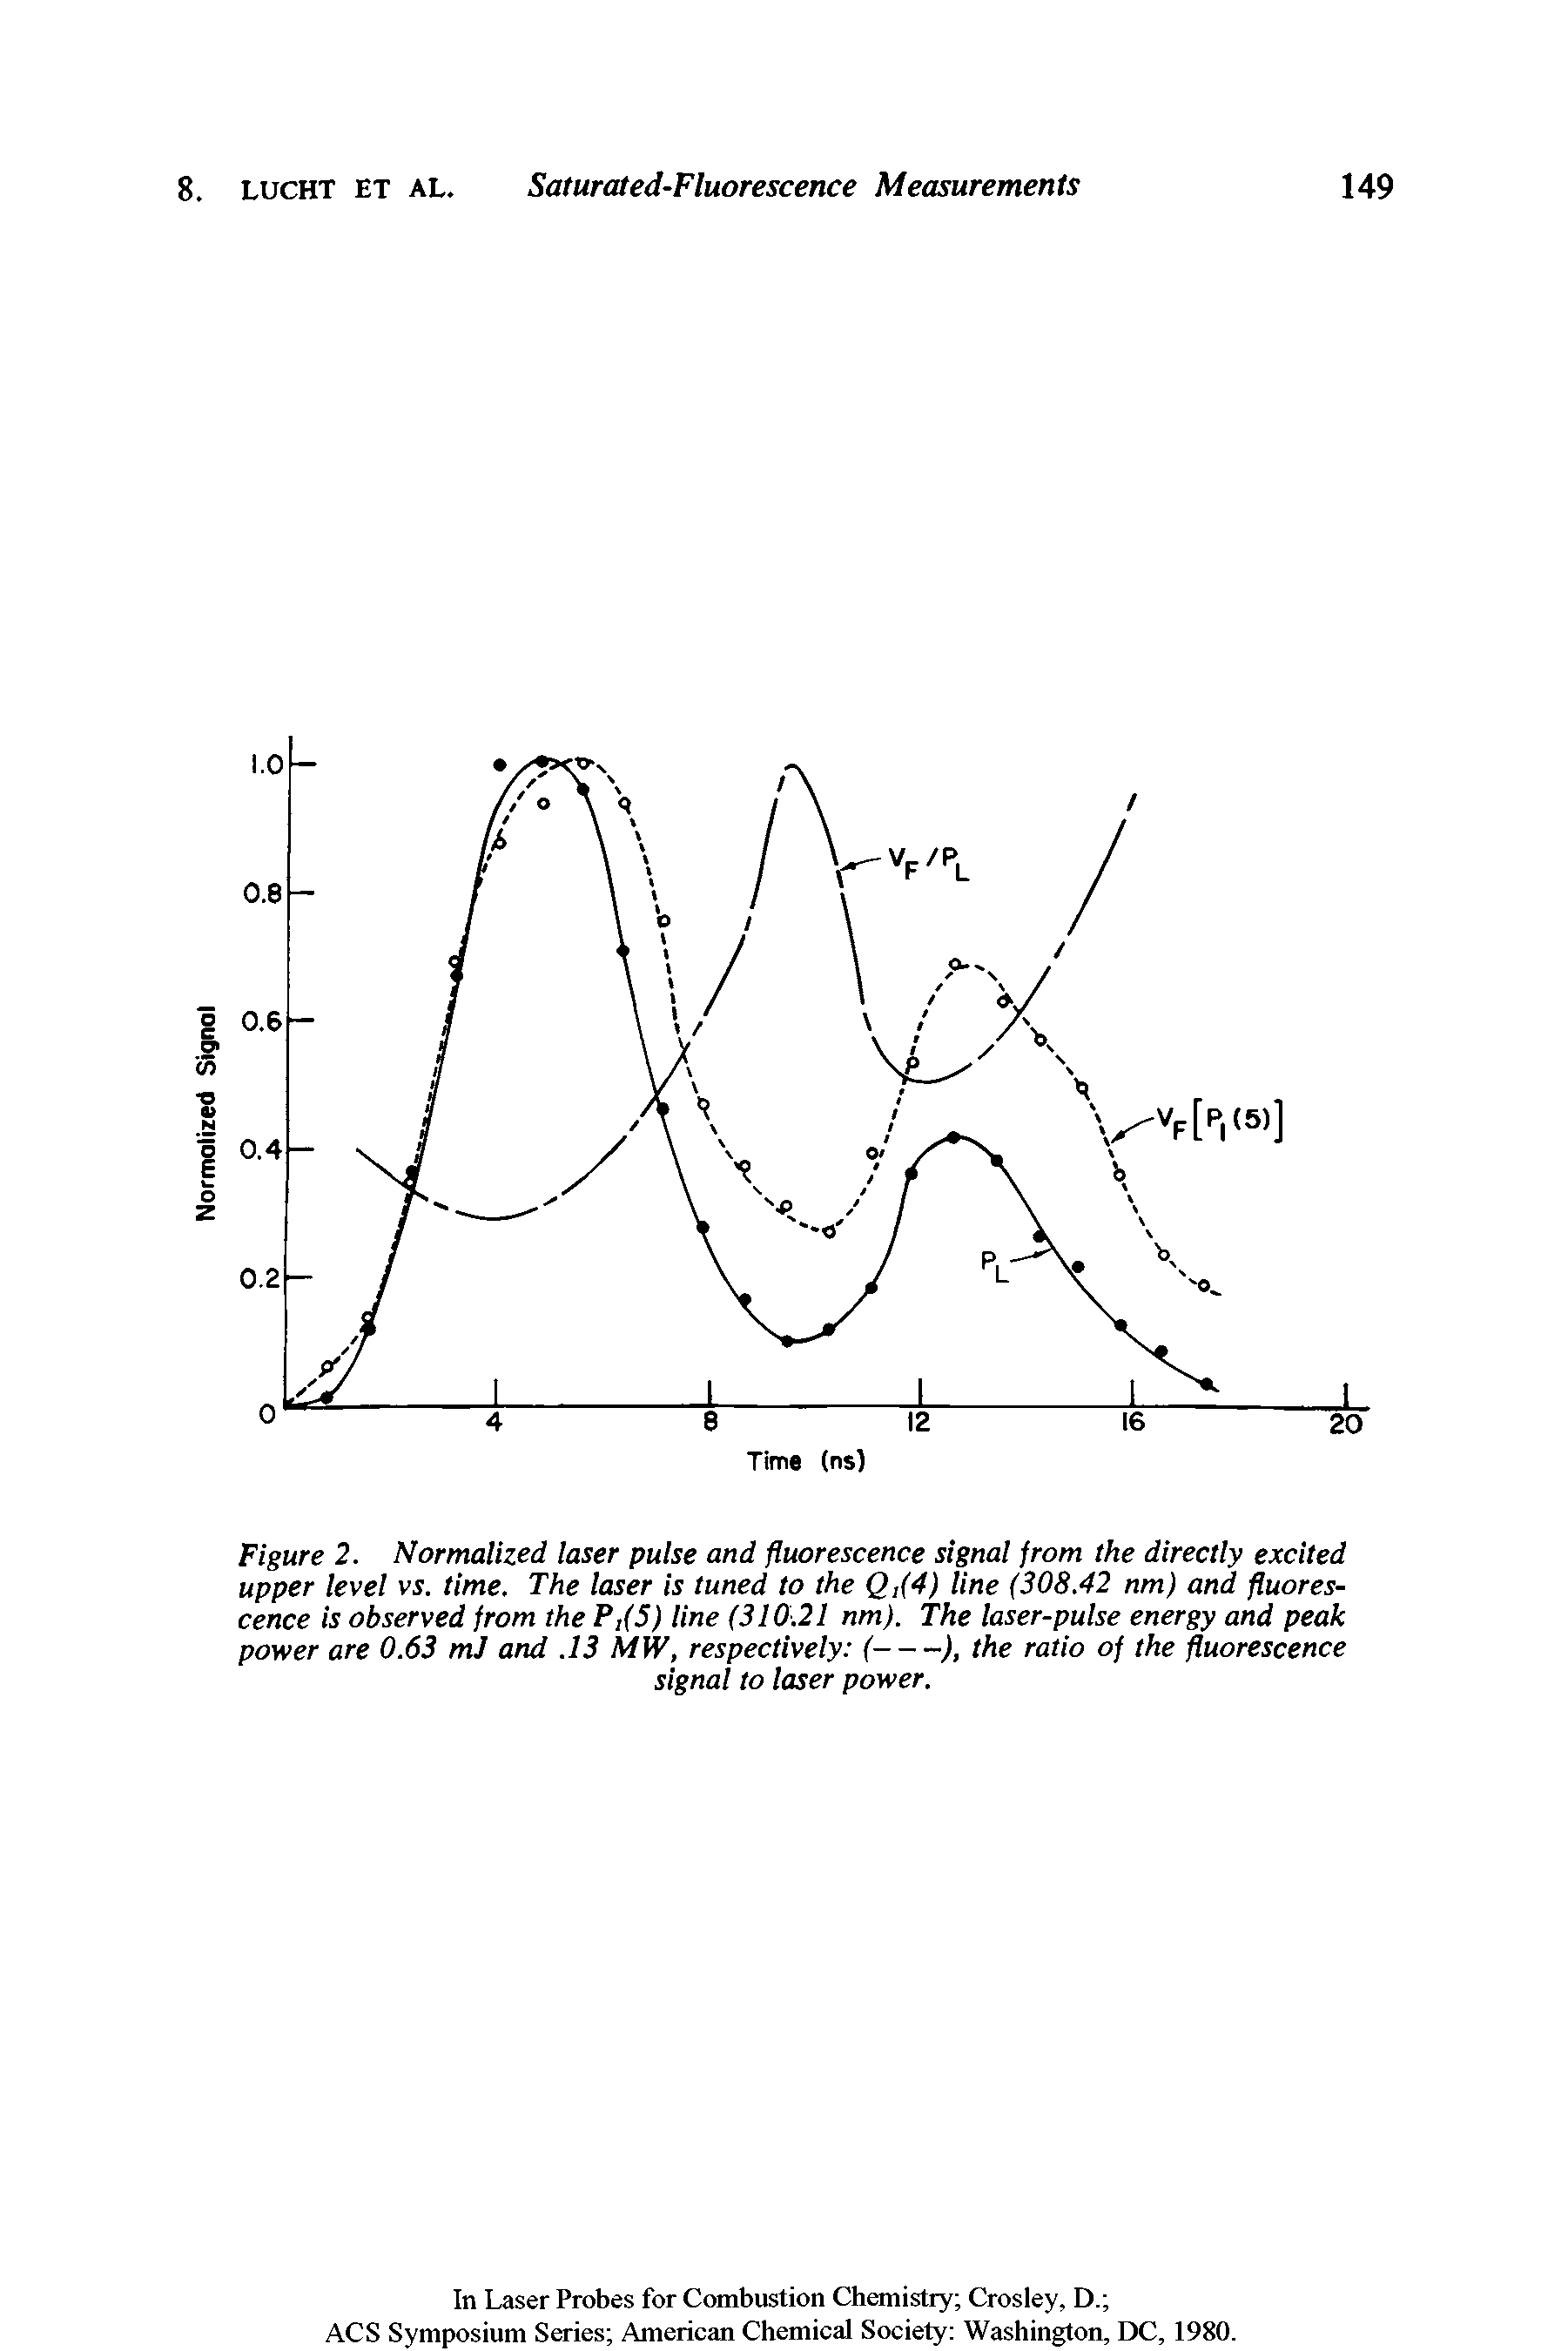 Figure 2. Normalized laser pulse and fluorescence signal from the directly excited upper level vs. time. The laser is tuned to the Q,(4) line (308.42 nm) and fluorescence is observed from the P,(5) line (310.21 nm). The laser-pulse energy and peak...